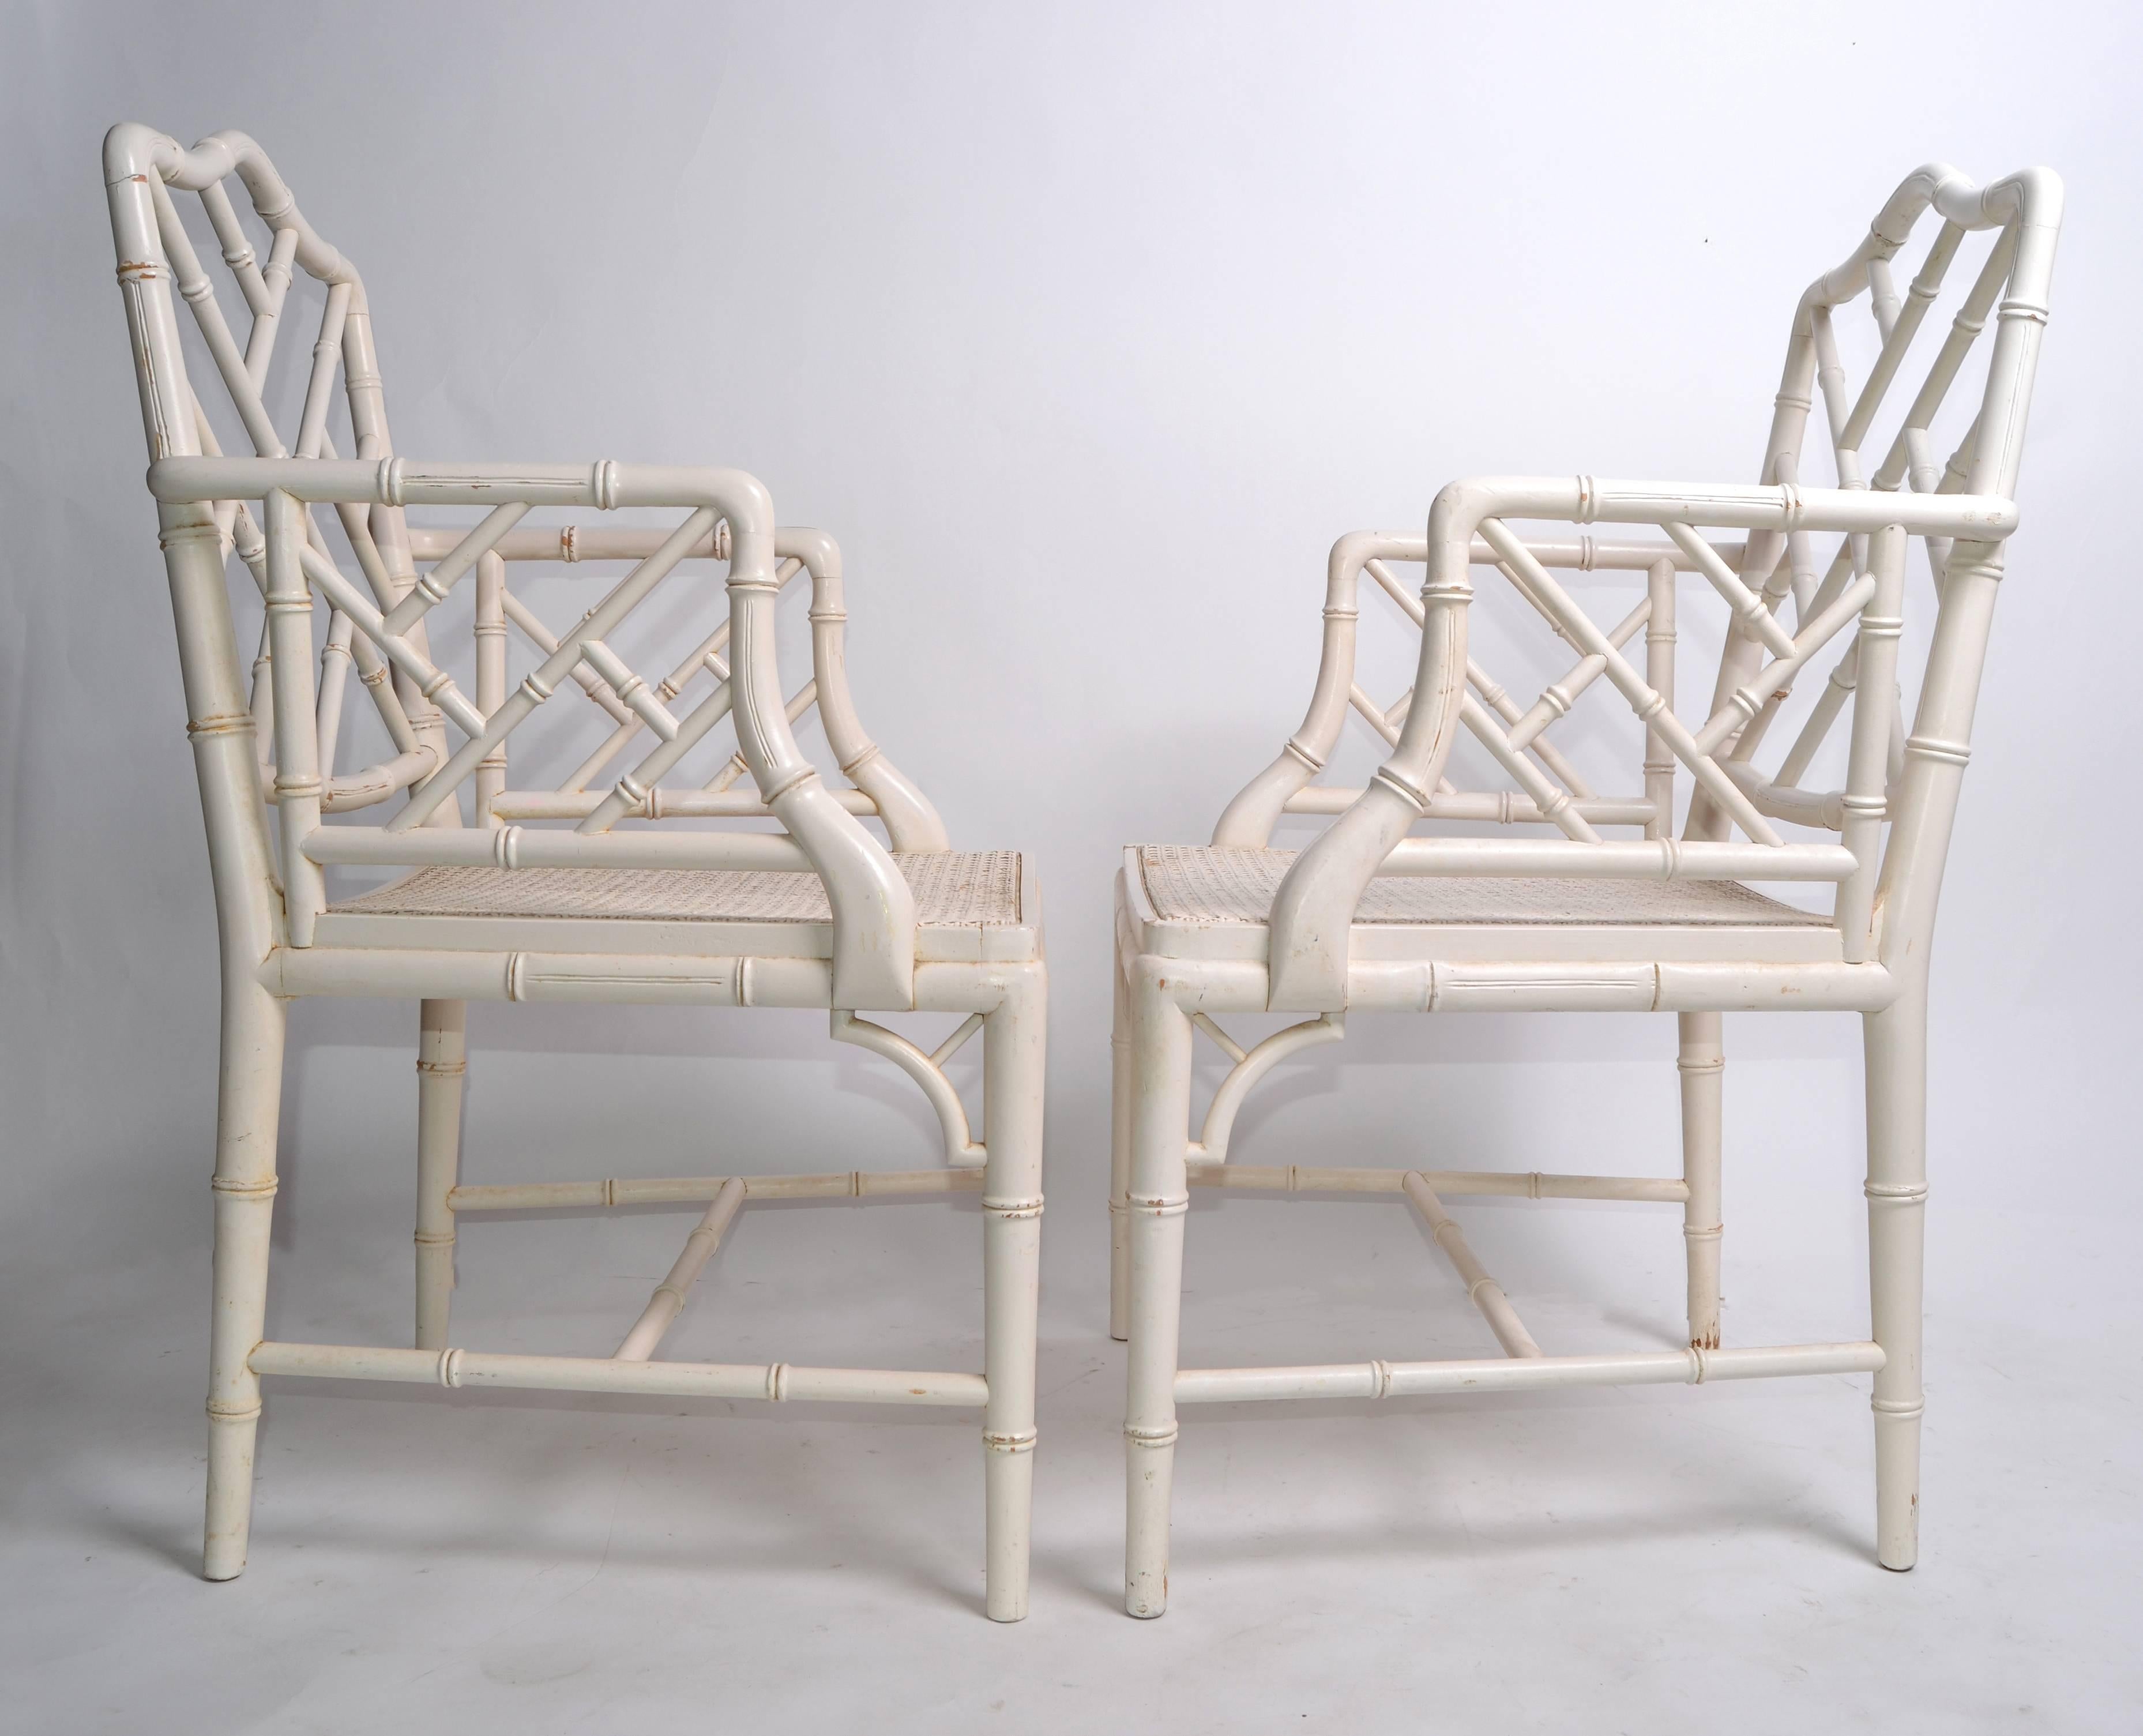 A pair of Hollywood Regency faux bamboo Chinese Chippendale armchairs.
Professionally refinished.
No makers mark.
Measures: Arm height 26.63 inches.